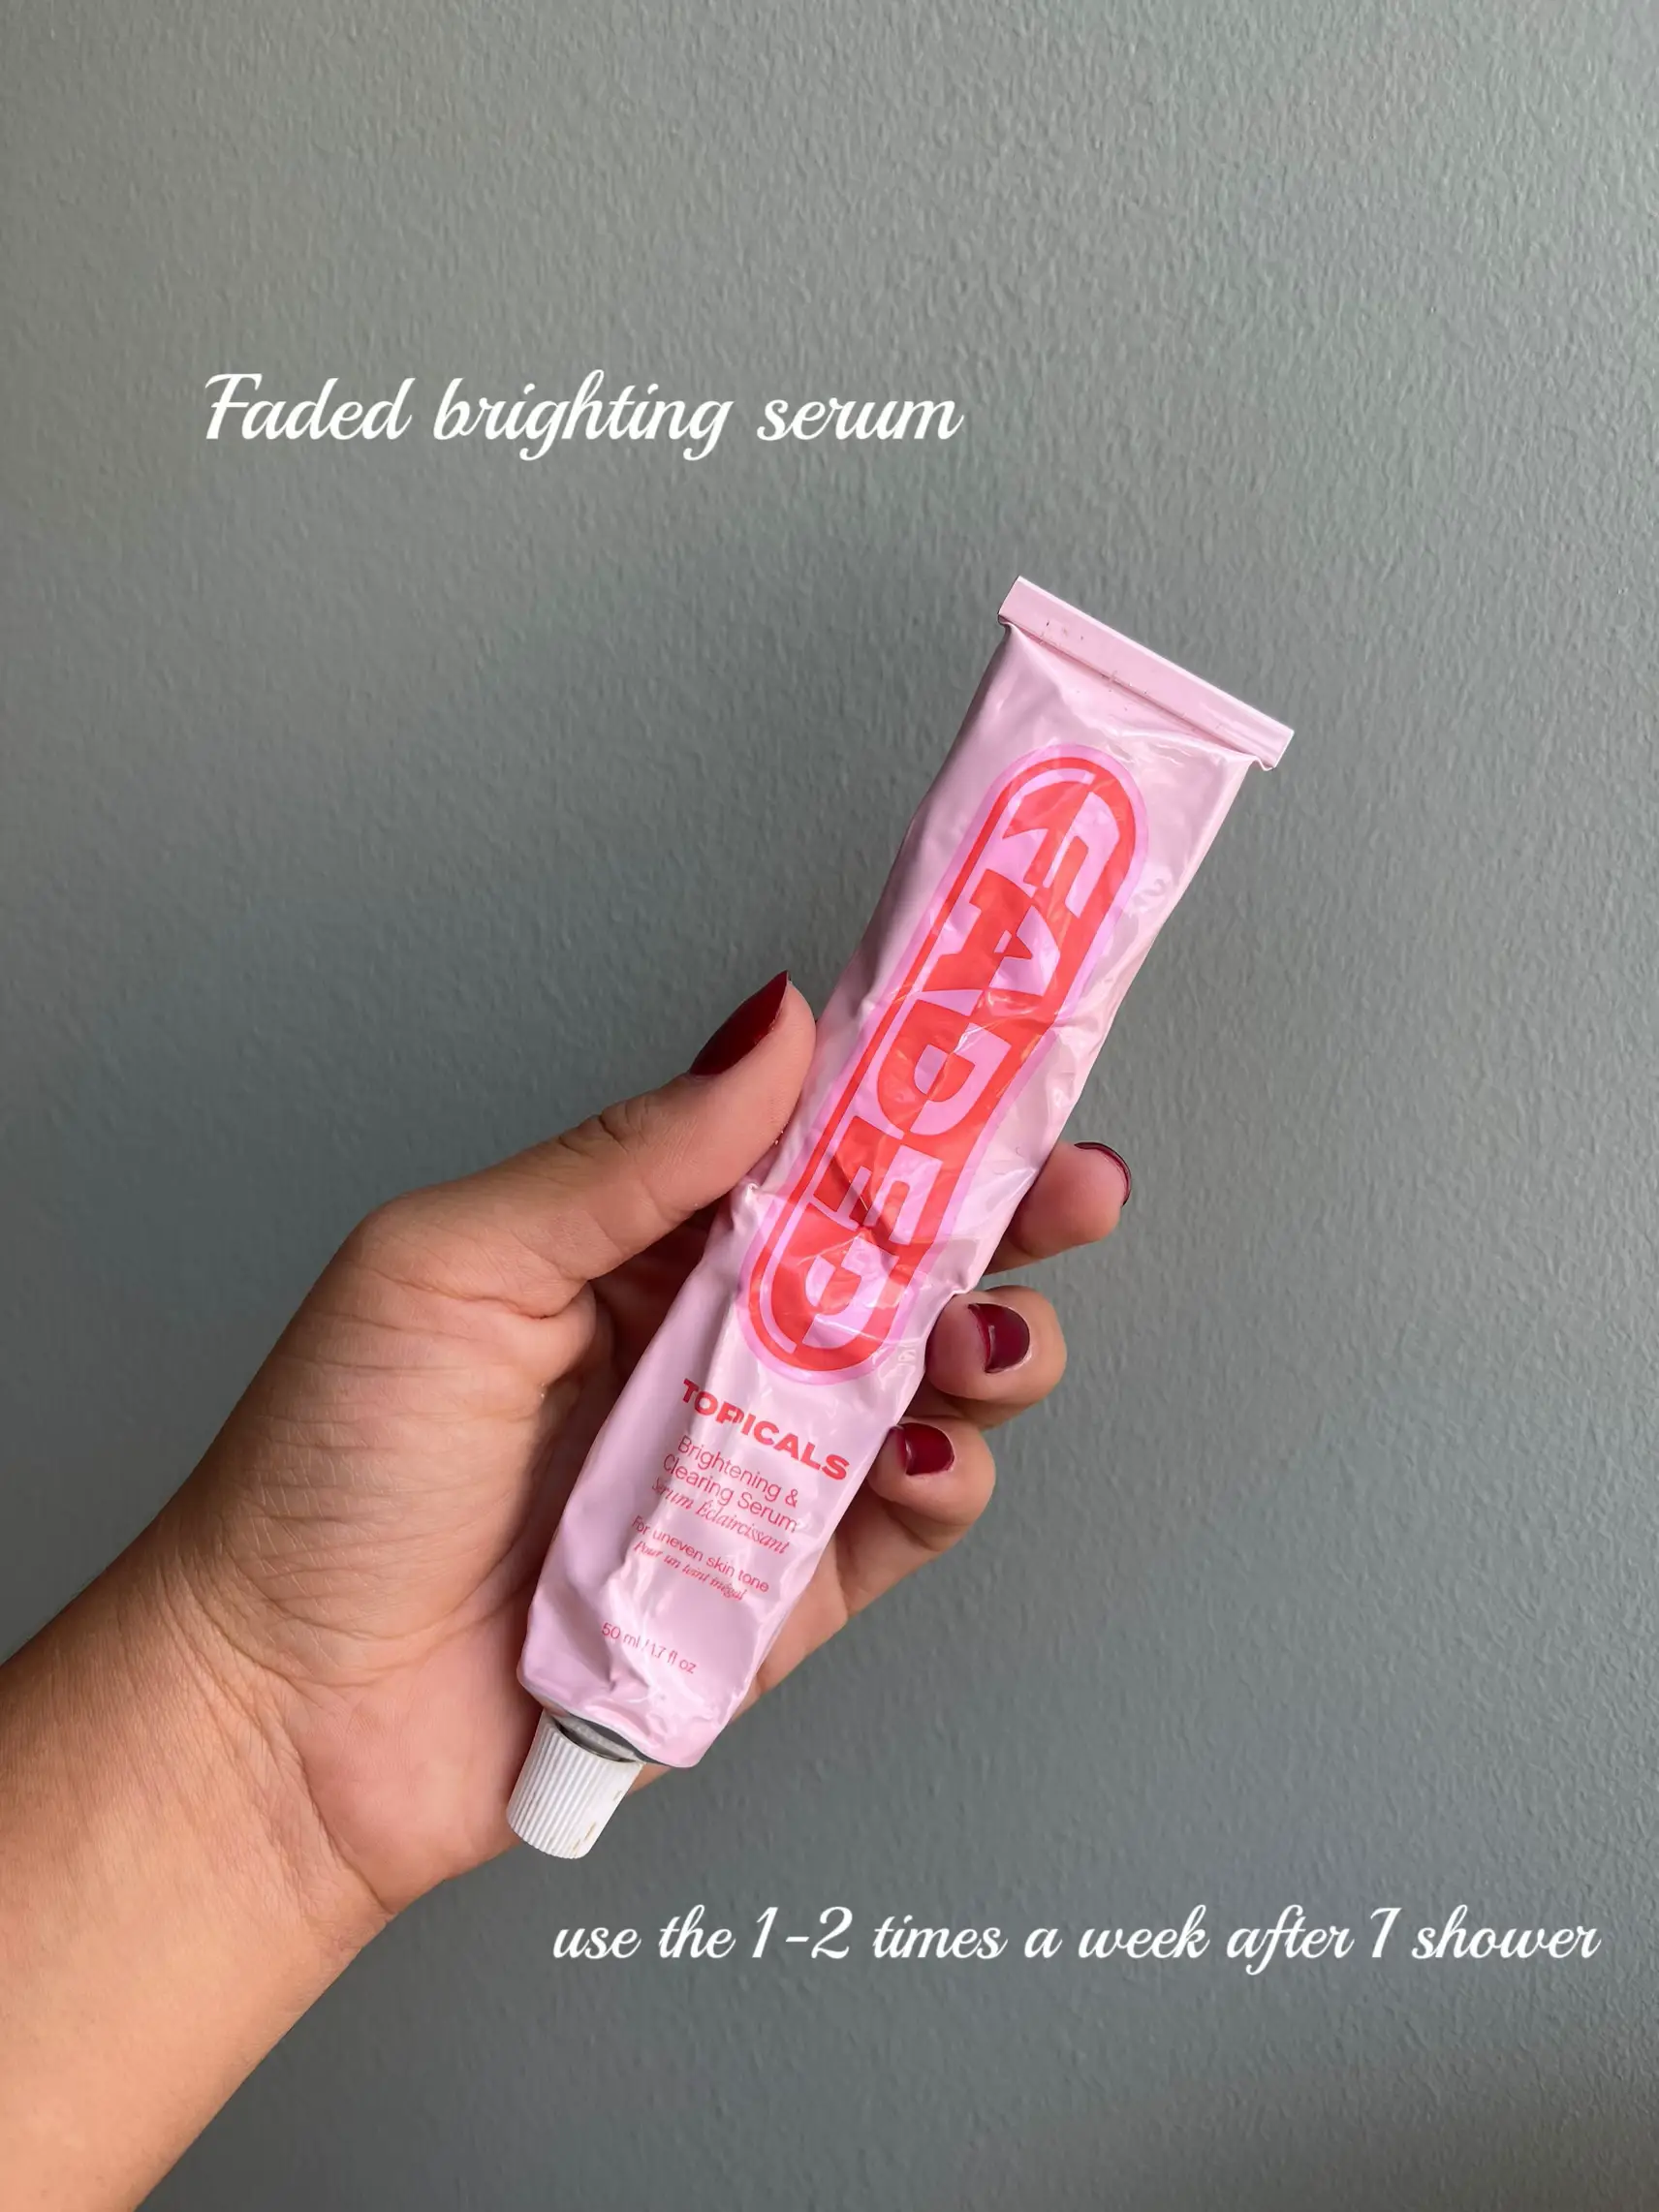 The Curie clay detox mask for armpits has gone viral on TikTok and